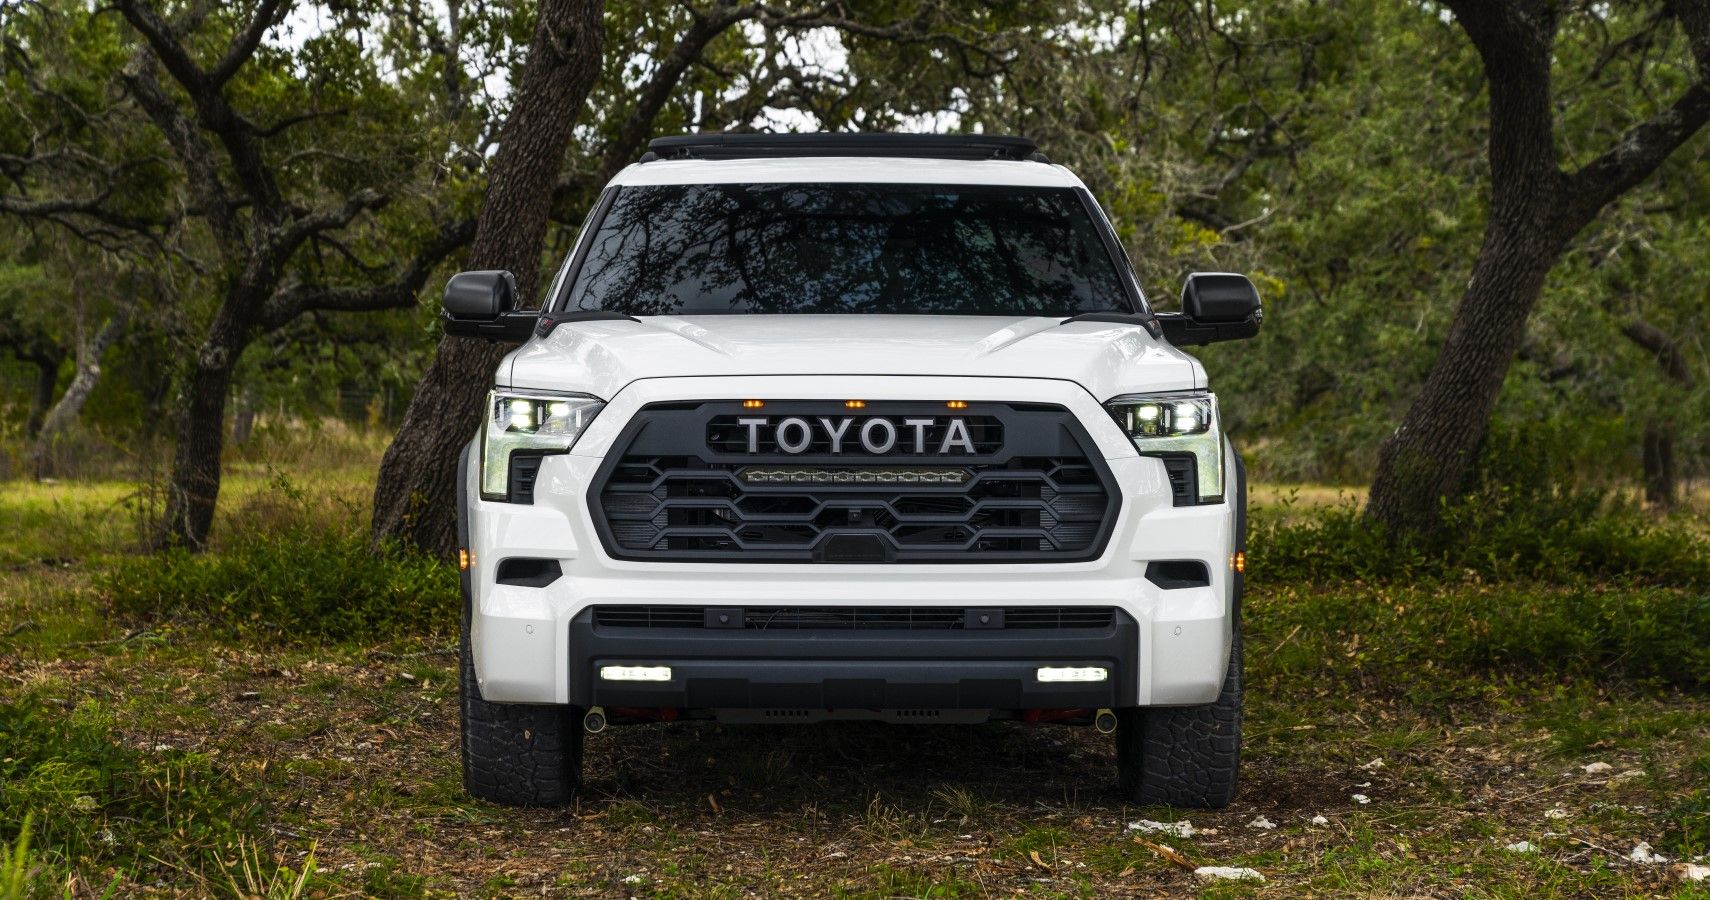 2022 Toyota Sequoia front view